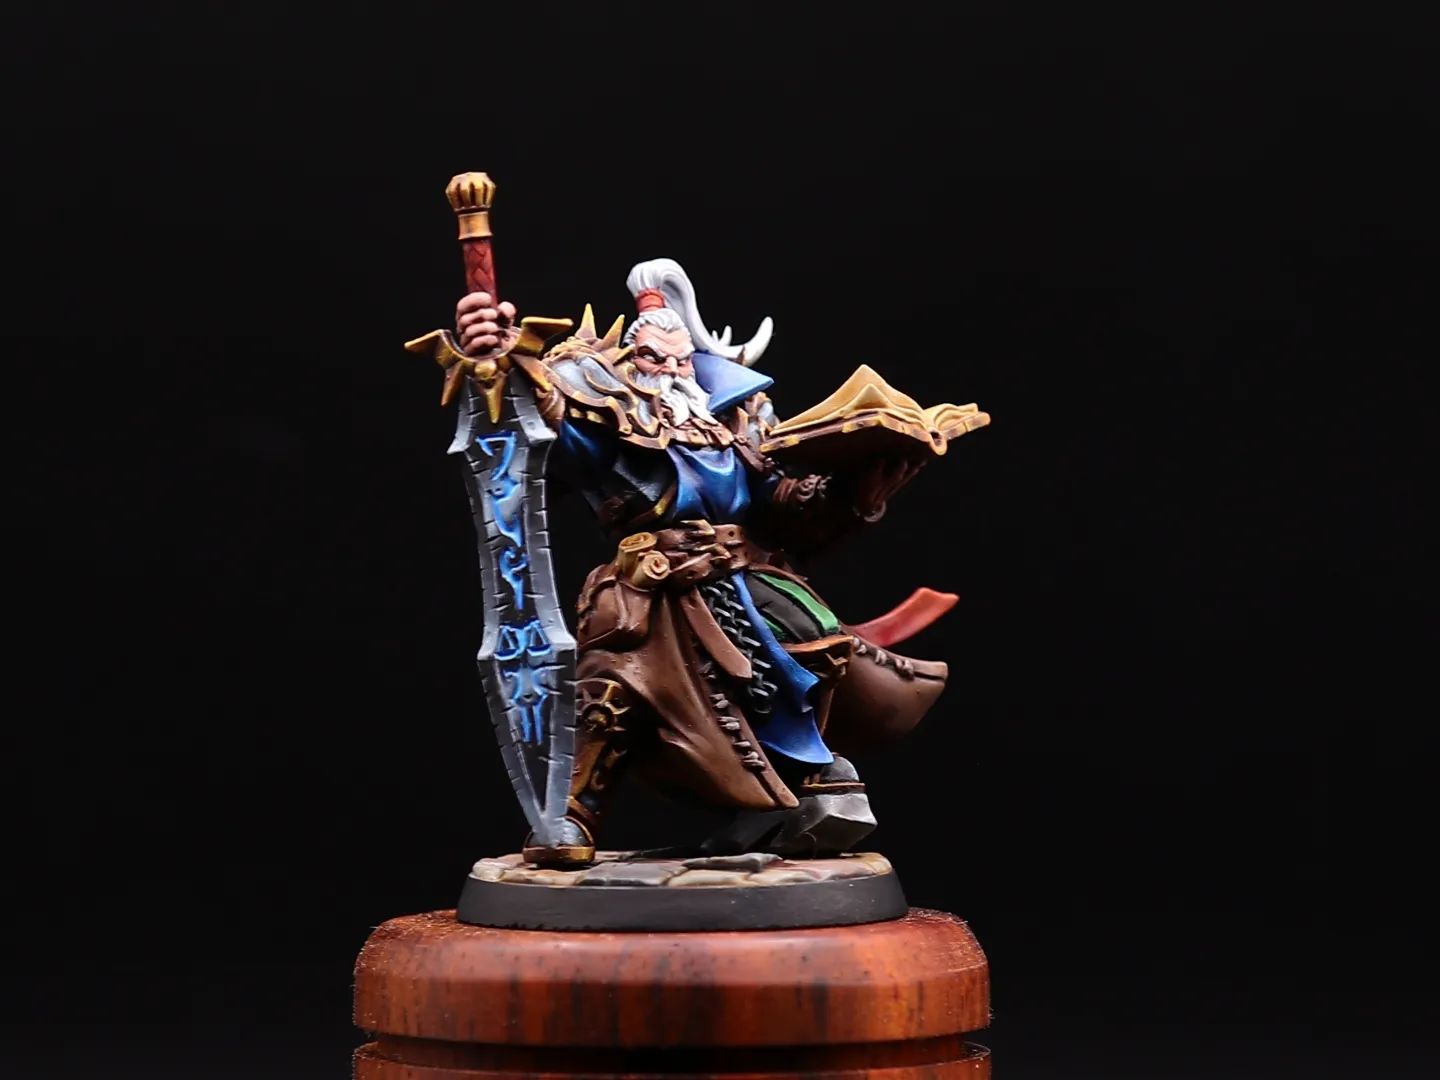 Lord Commander Casymir, I started this in march... im a bit rusty... I might take some better pics another time? #paladin #miniature #dnd #dungeonsanddragons #mini #painting #sword #nonmetallicmetal #lordcommandercasymir #rpg #tabletop #wargaming #roleplay #roleplaying #roleplayinggame #roleplayinggames #knight #spellcasting #magic #mage #game #vellajopaints #vallajo #gamesworkshop